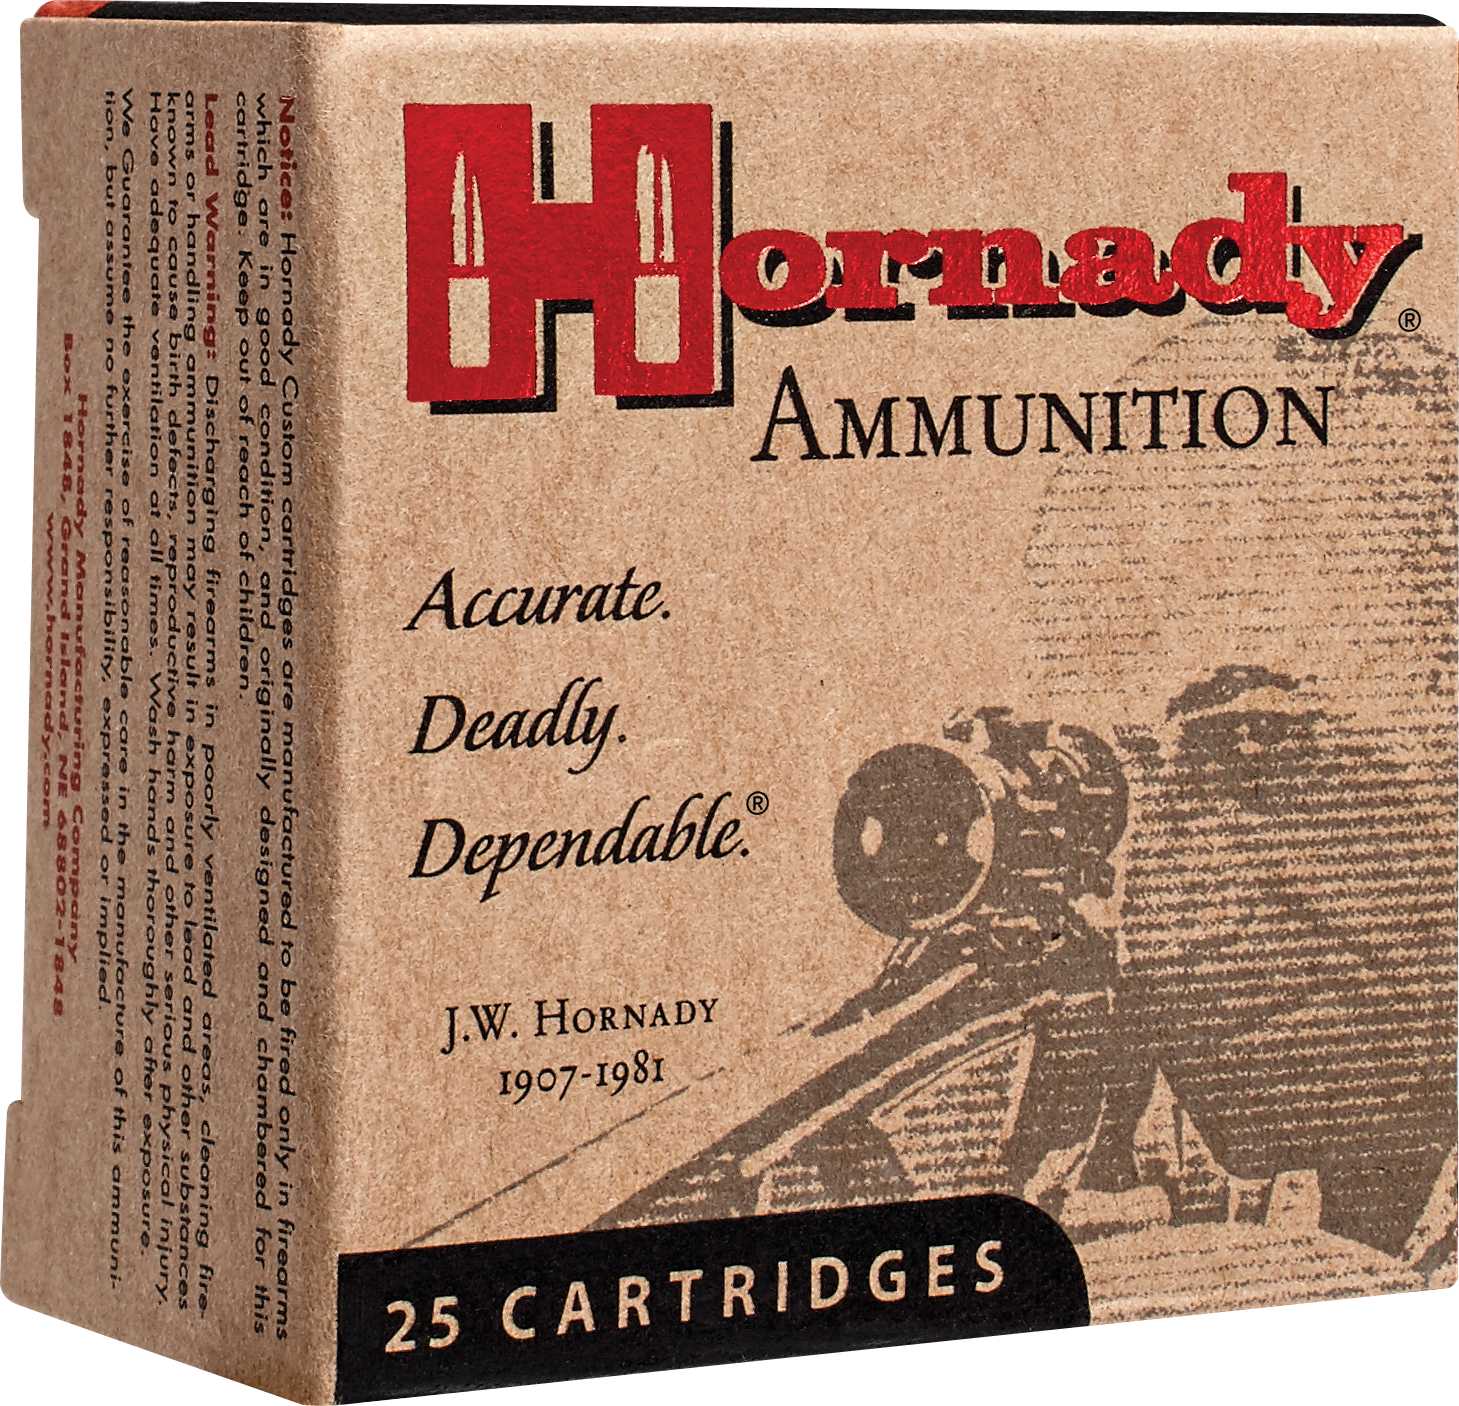 32 ACP 25 Rounds Ammunition Hornady 60 Grain Jacketed Hollow Point